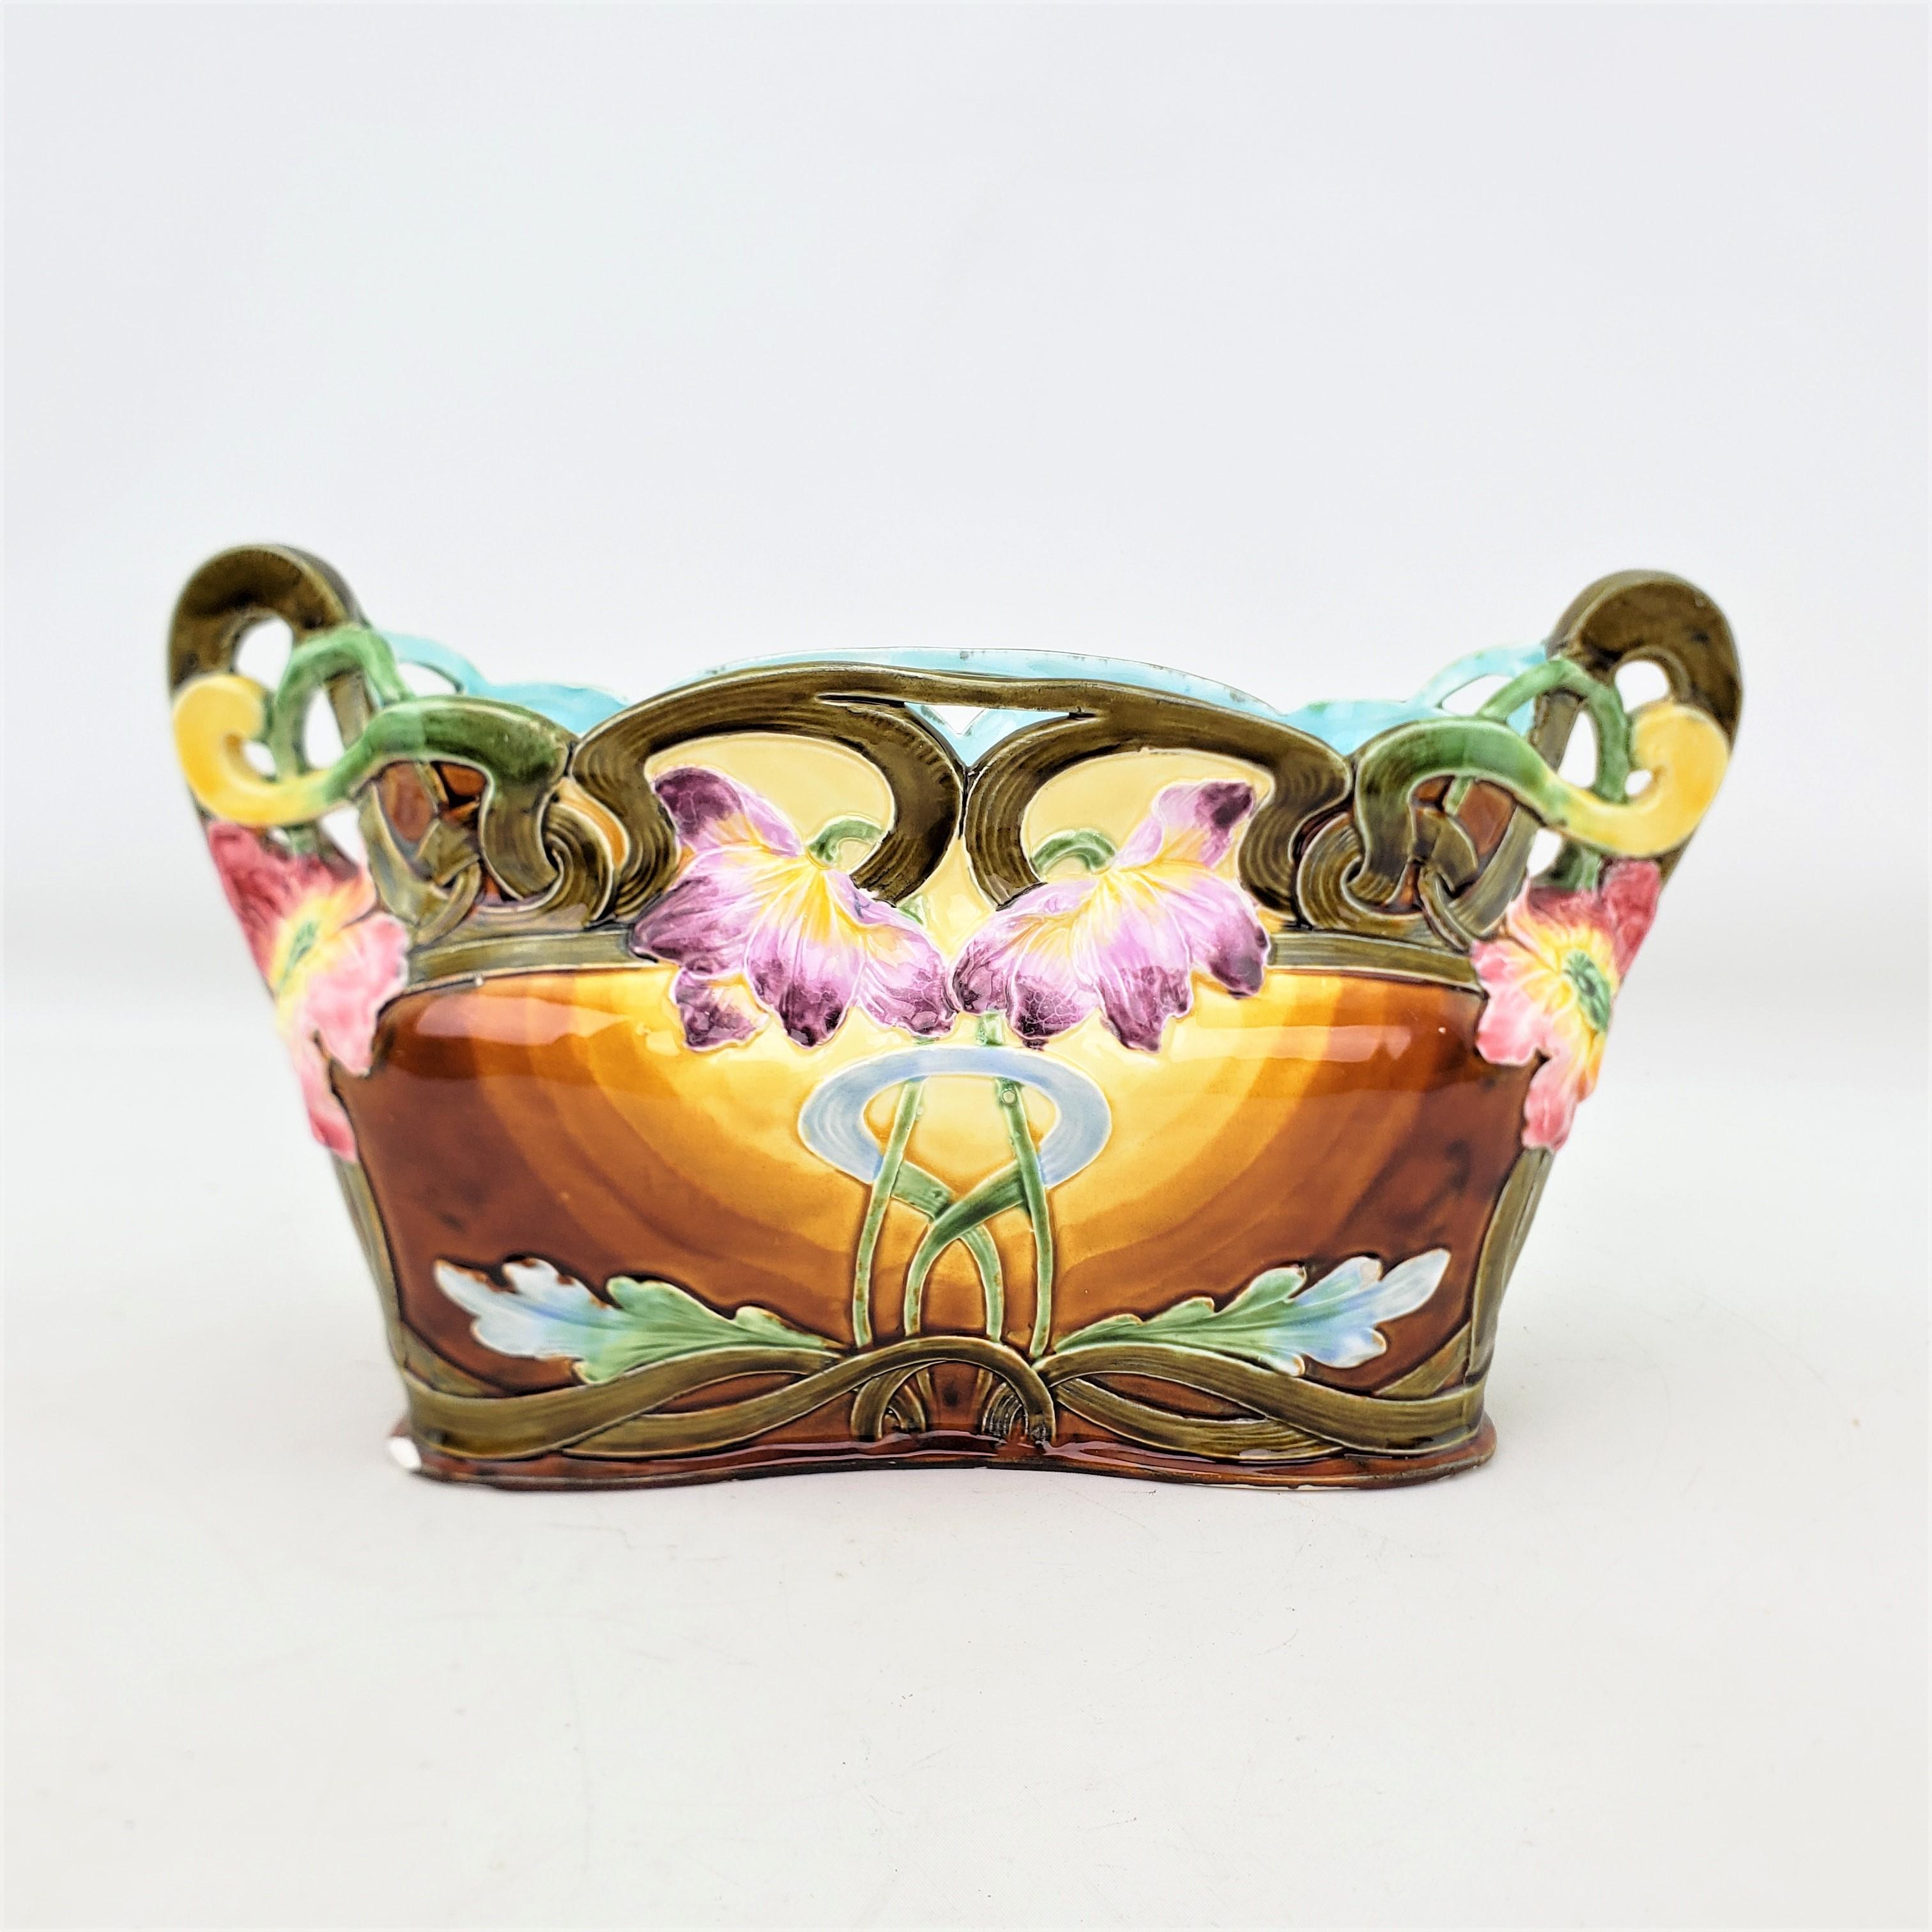 Antique English Majolica Planter or Jardiniere with Floral Decoration For Sale 3